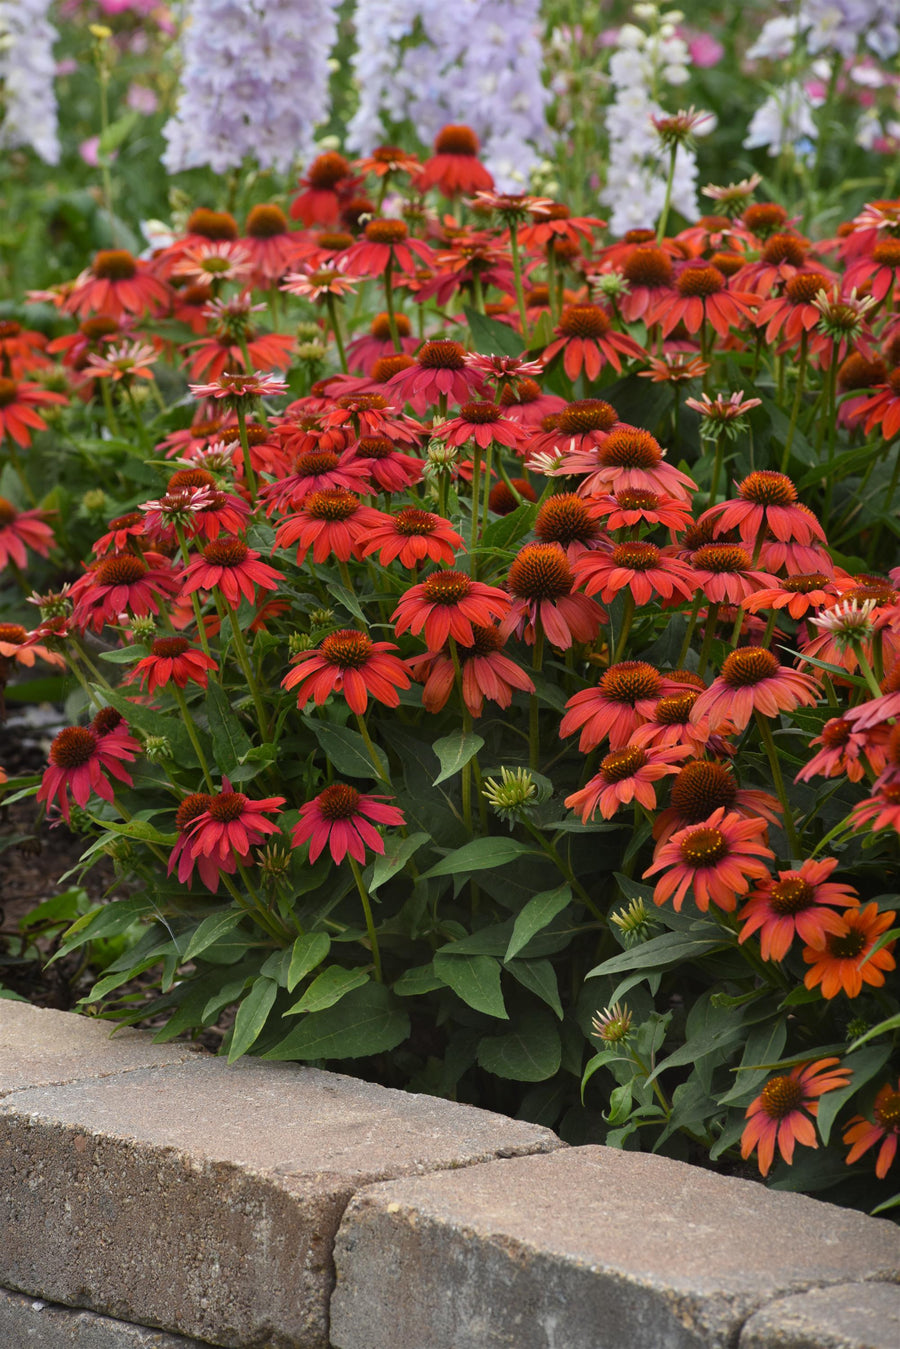 Echinacea Artisan Red Ombre (coneflower), entire plant in bloom.